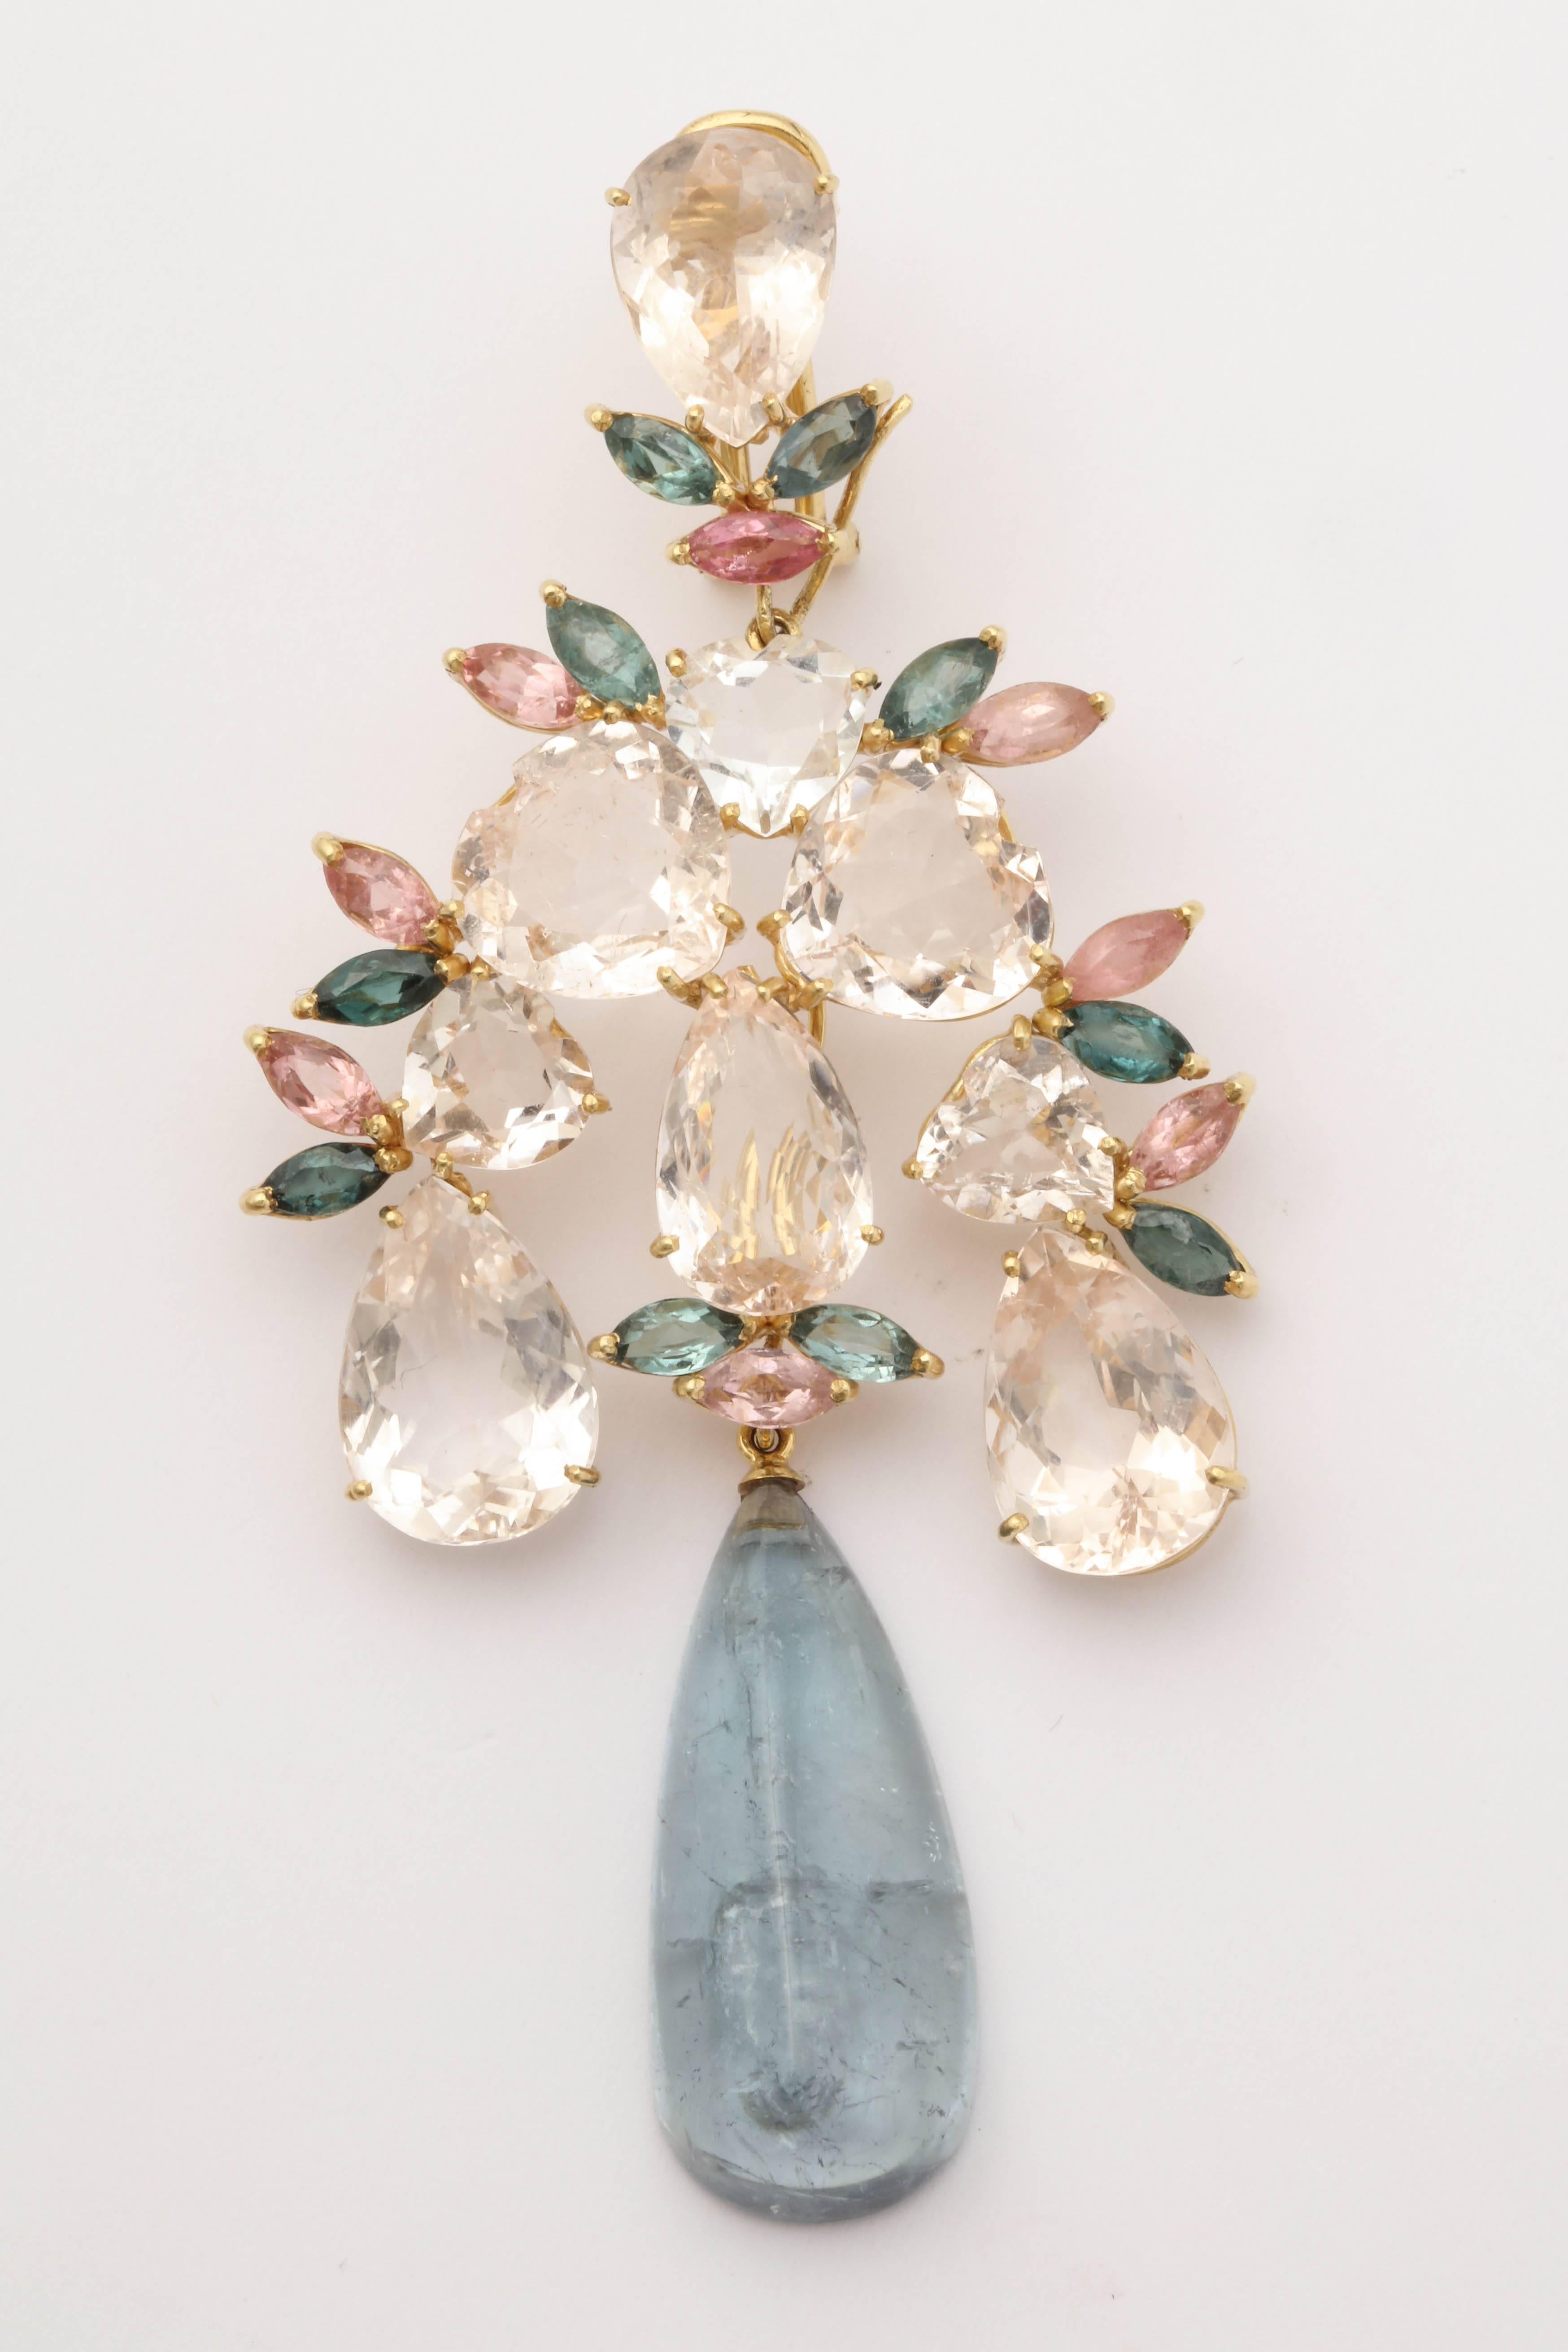 One Pair Of Ladies Detachable And Convertible Dramatic Earrings Embellished With Numerous Pear Shaped and Marquis Cut Pale Pink Kunzites And With Twenty Marquis Cut Green Tourmalines. One Large Cabochon Cut Tear Drop Aquamarine Stone Measuring